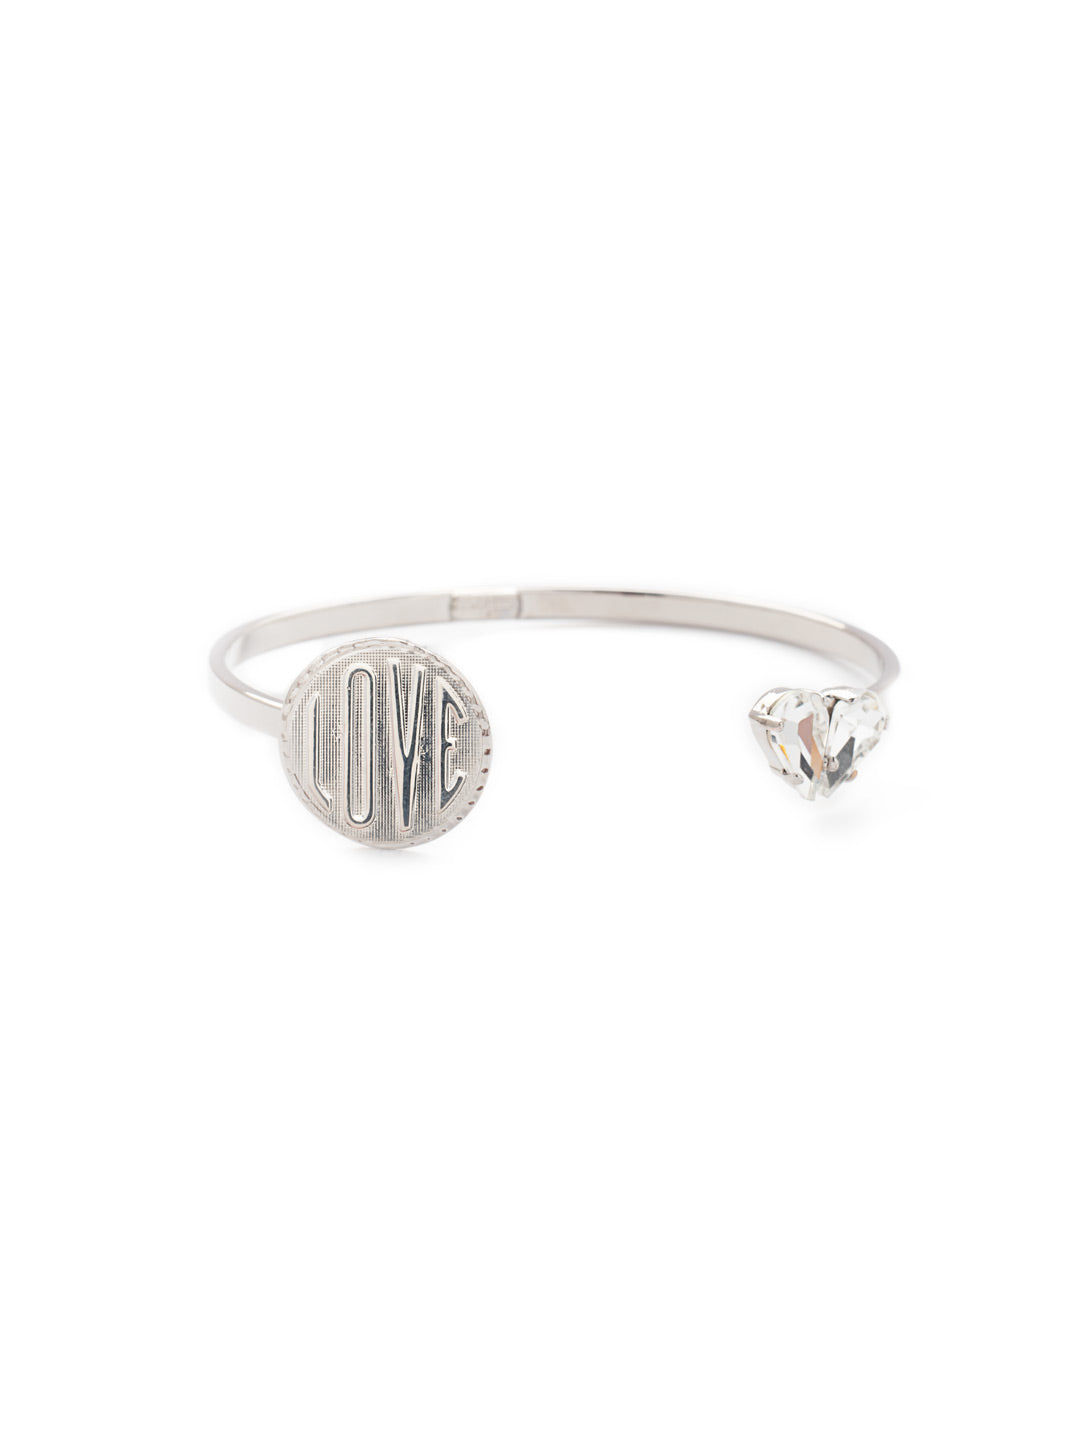 Priya Cuff Bracelet - BEW33PDCRY - <p>Slip on a statement of love and signature Sorrelli sparkling crystals that come together to form a heart for Valentine's Day, or any day, with the Priya Cuff Bracelet. From Sorrelli's Crystal collection in our Palladium finish.</p>